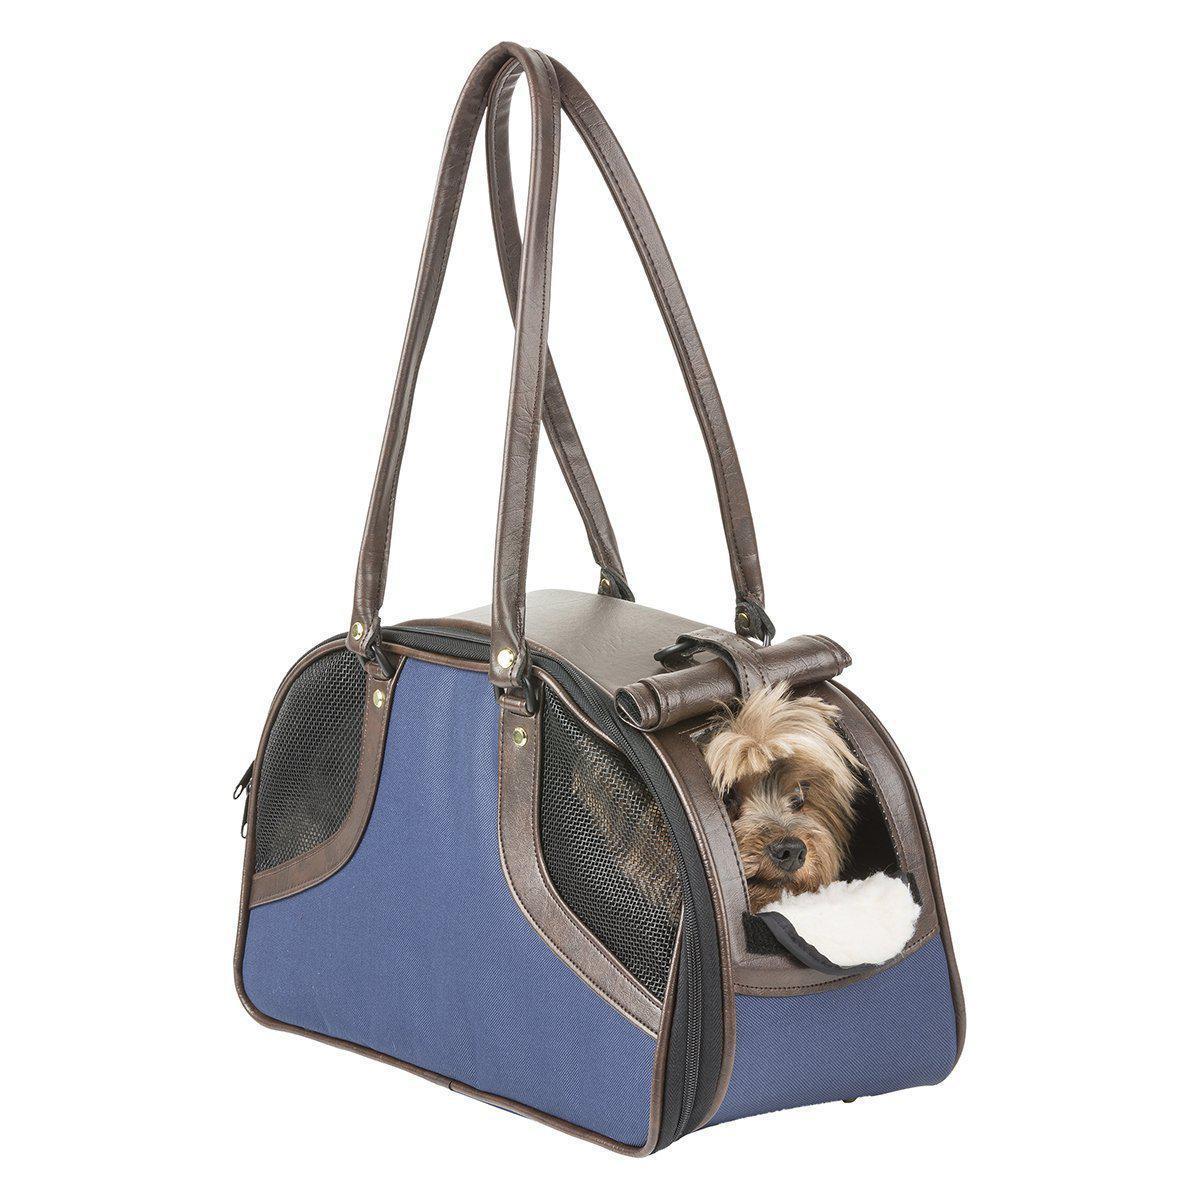 Petote Quilted Luxe Metro Tassel Dog Carrier